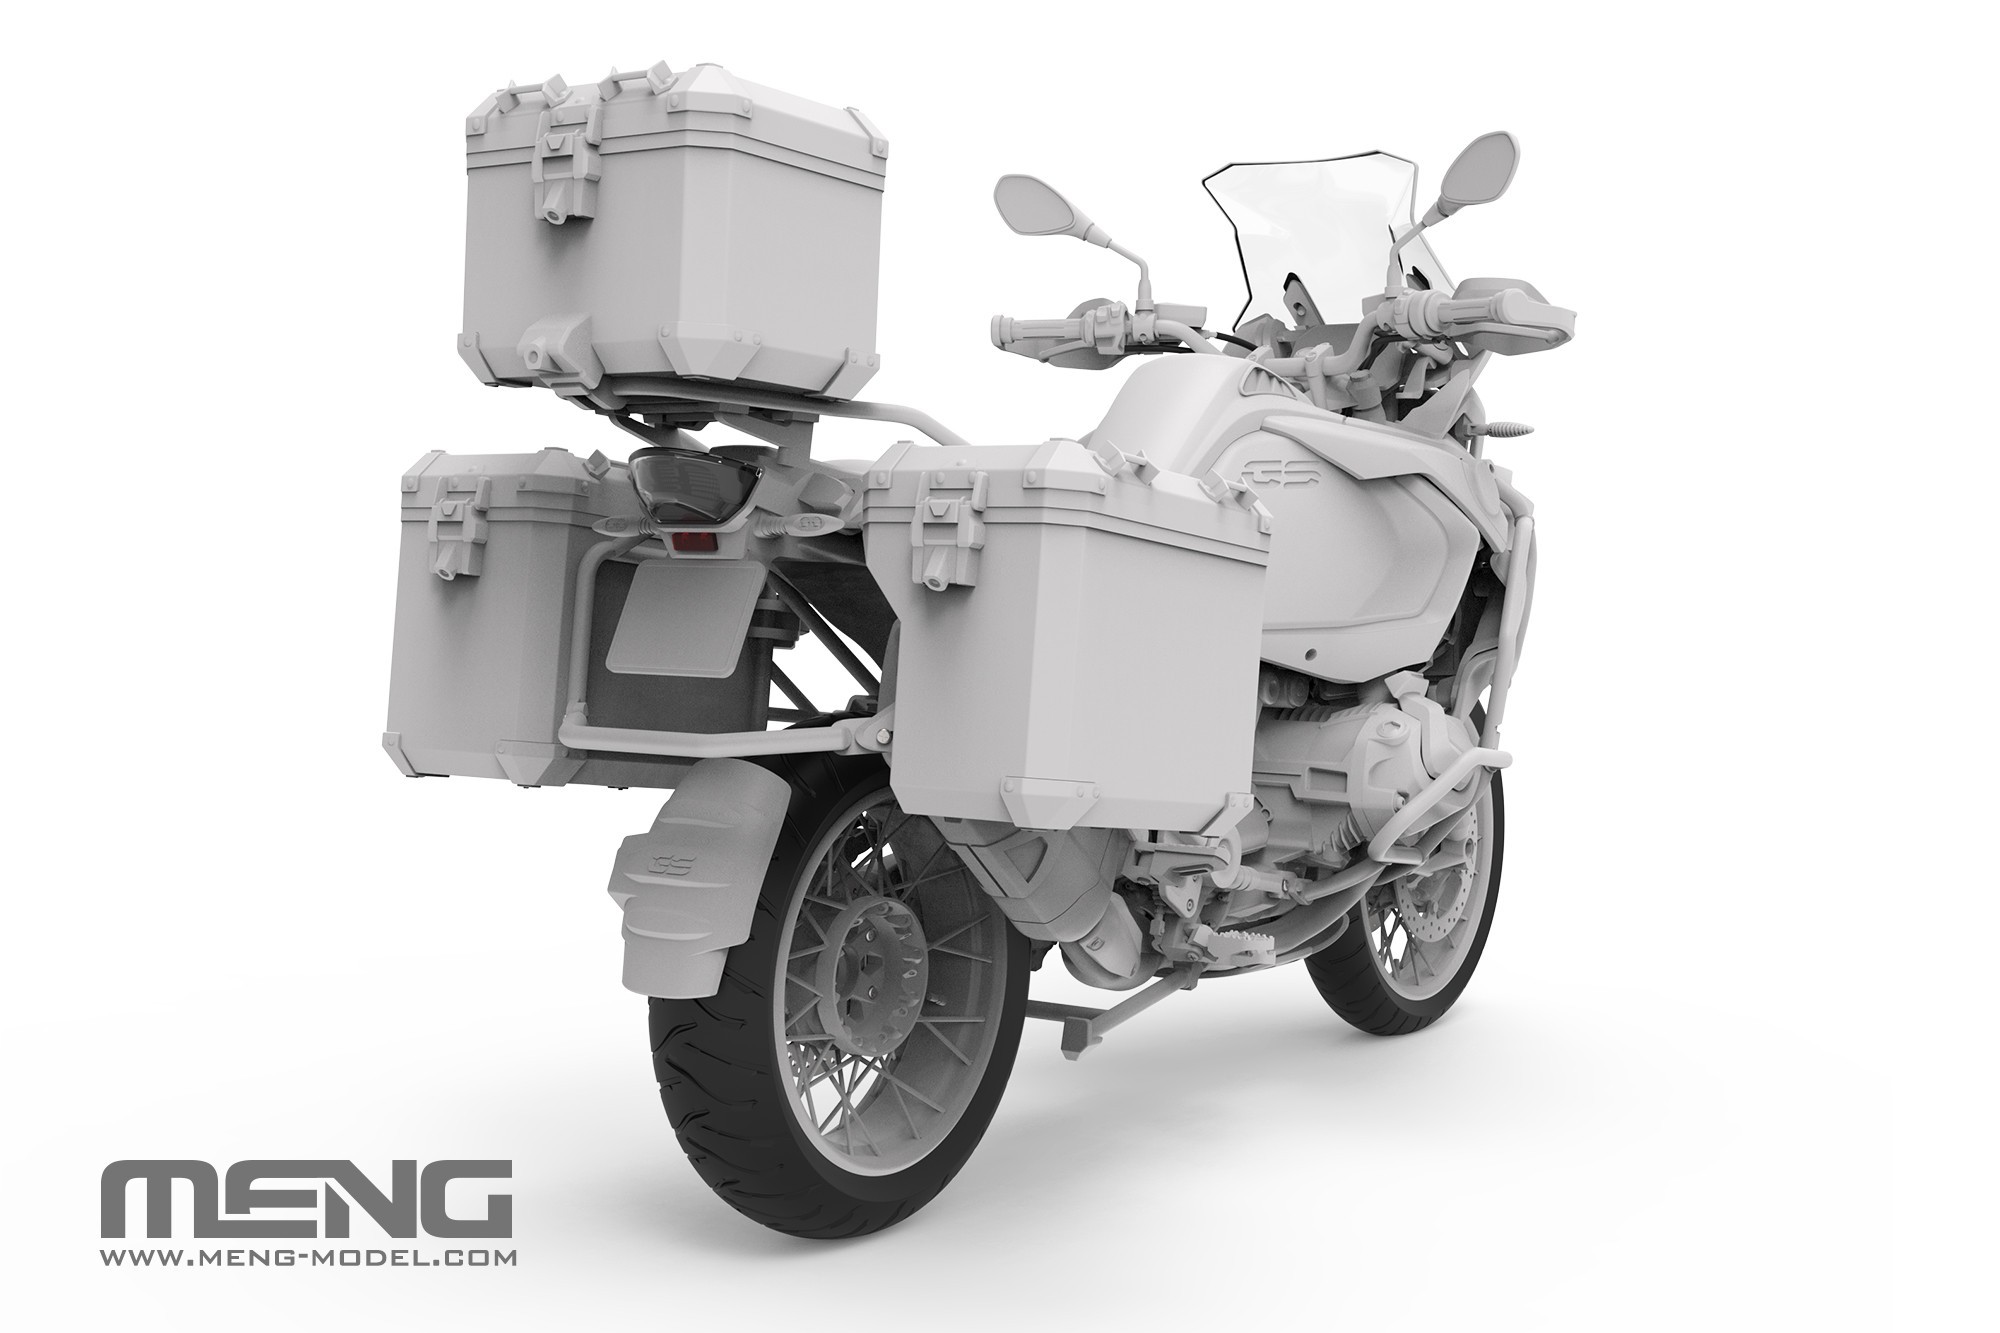 The separately sold SPS-091 luggage cases can be installed on it to showcase the unique charm of the motorcycle